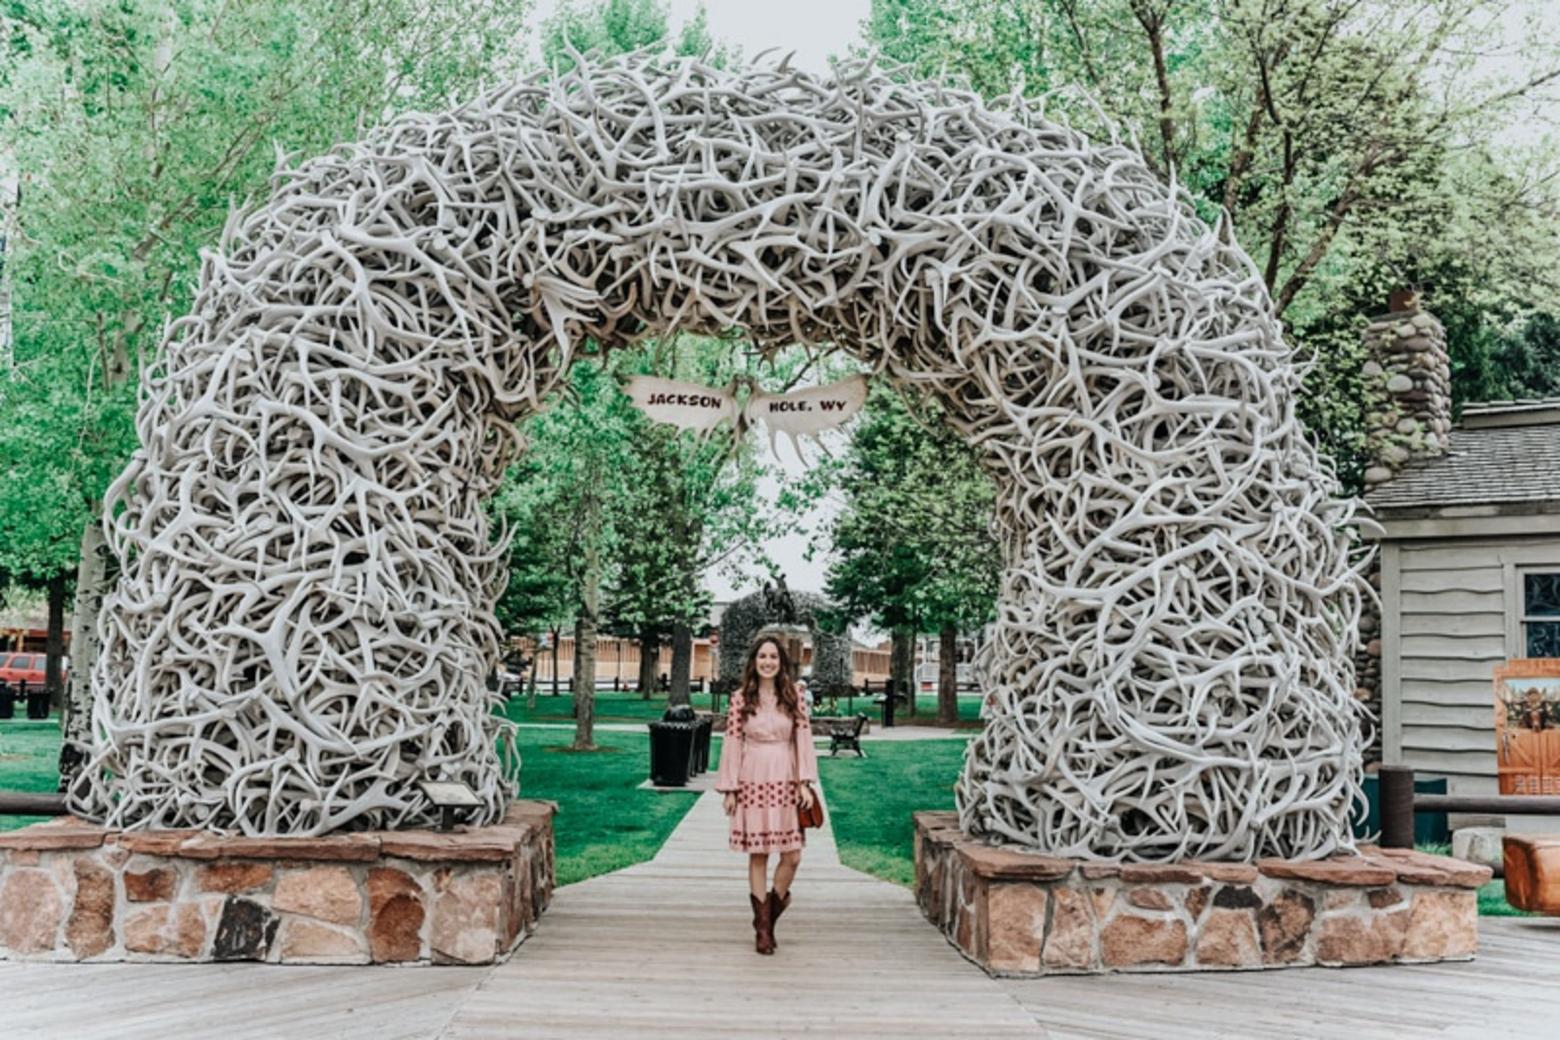 Jackson, Wyoming is noted for many reasons, including the arches made of elk antlers that adorn the four corners of the downtown square. in fact, Jackson Hole is synonymous with the historic conservation of Rocky Mountain elk as a species.  Photo courtesy Jackson Hole Chamber of Commerce